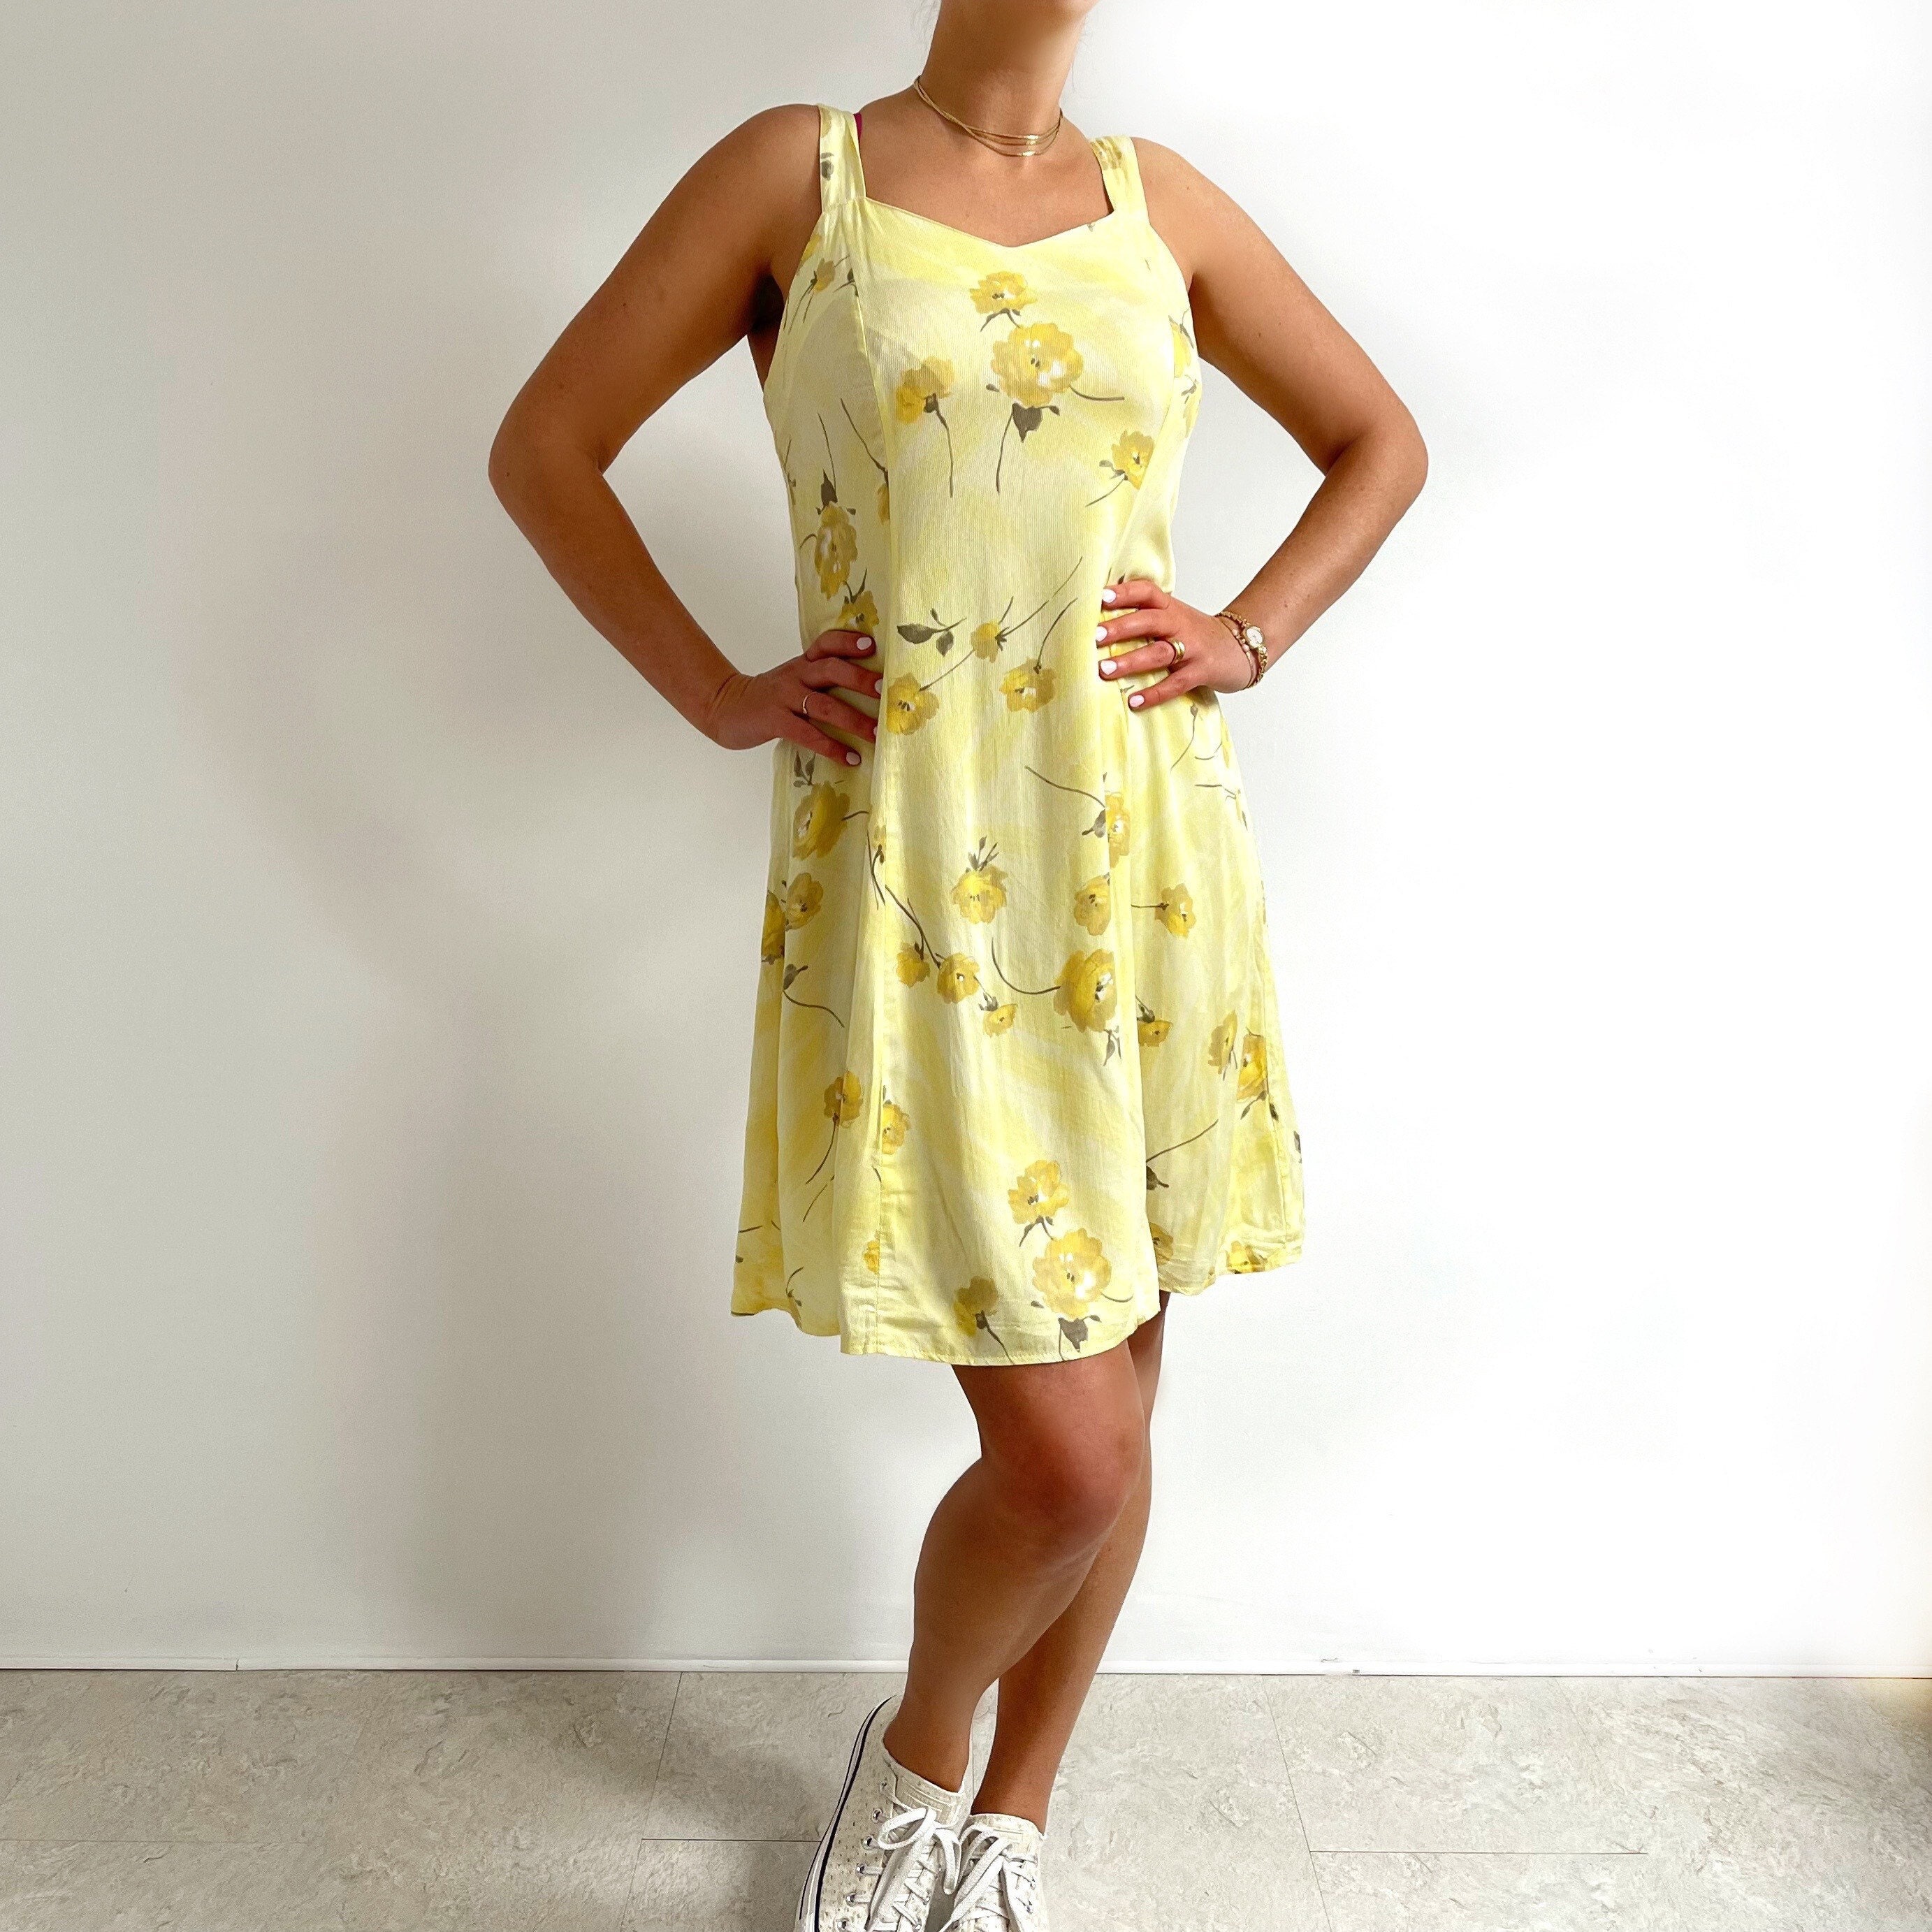 Vintage Sundress Yellow Floral Dress With Bra 90s Cotton Yellow and White  Dress S M 